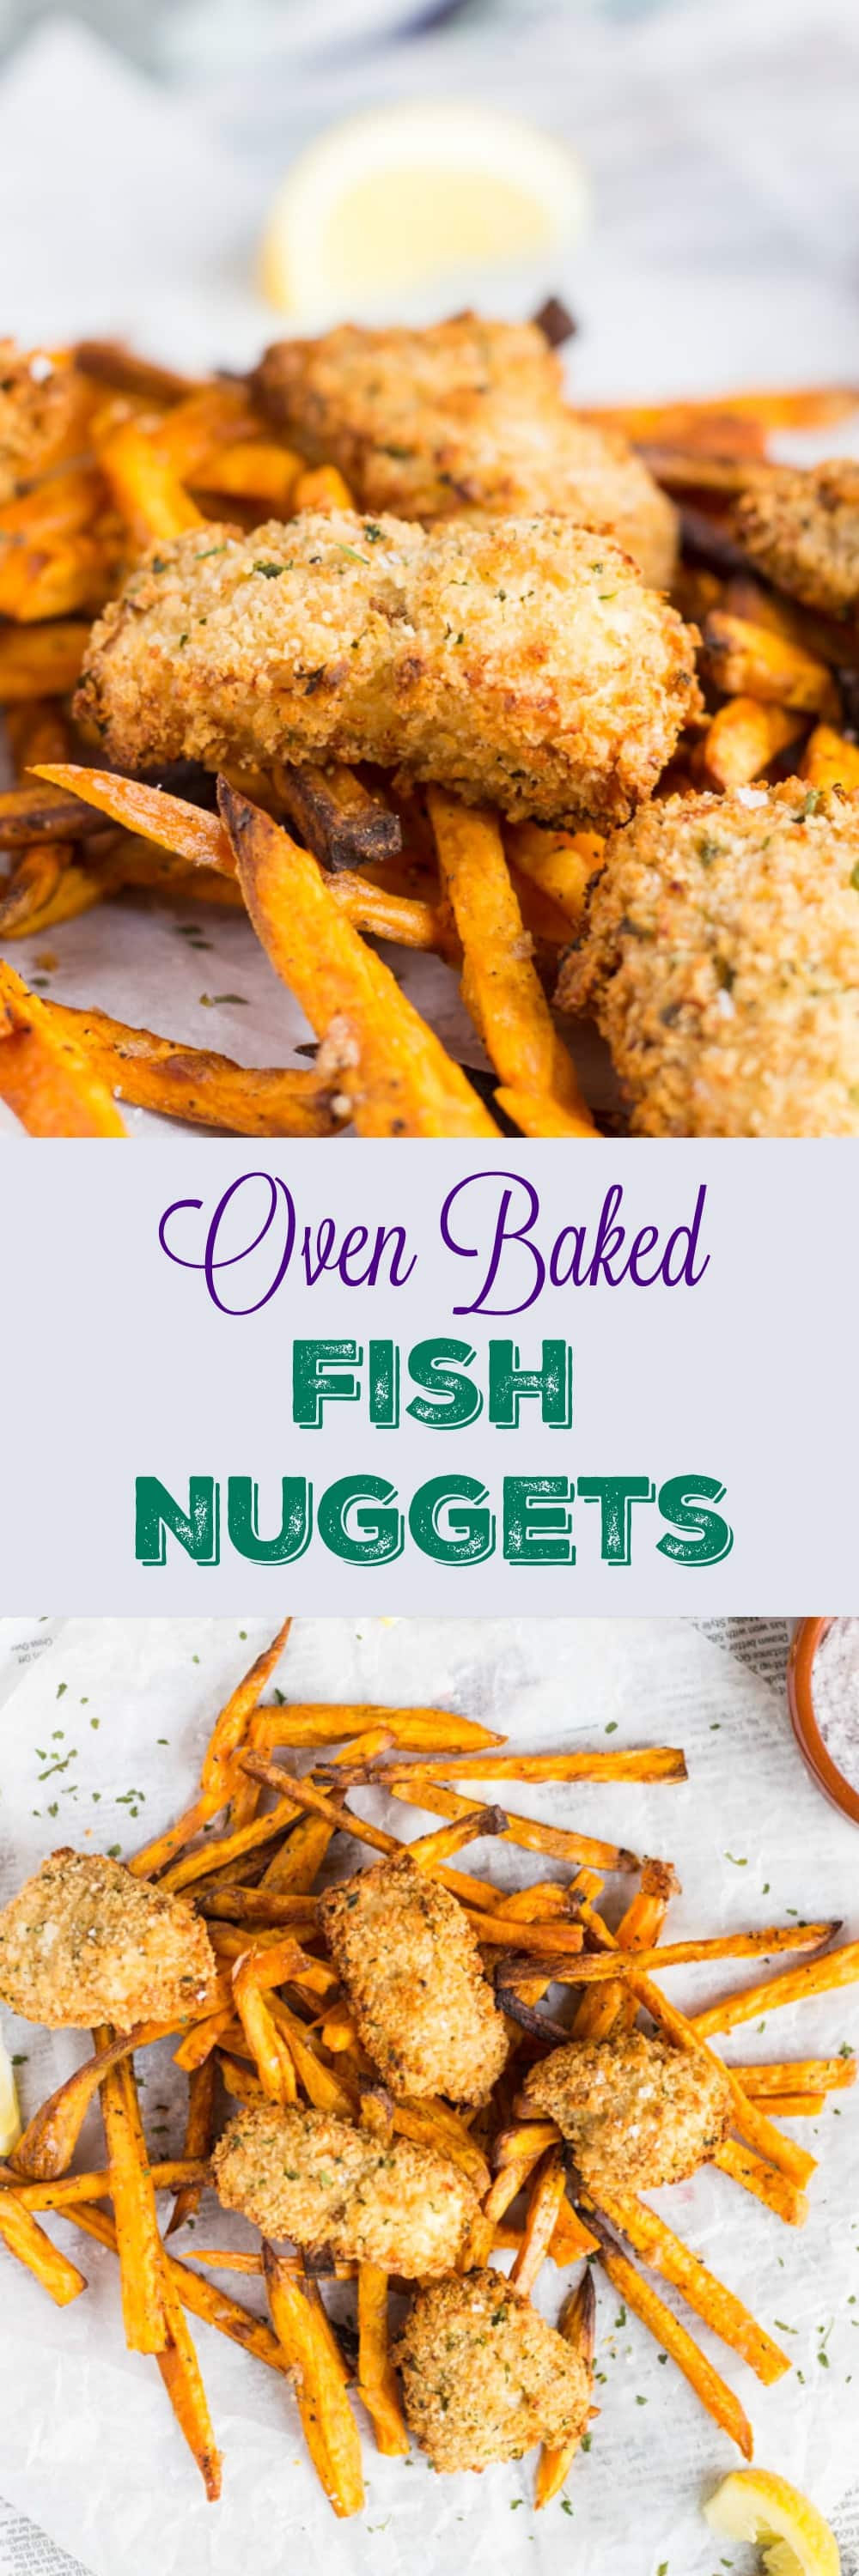 How To Make Your Own: Easy Oven Baked Fish Nuggets